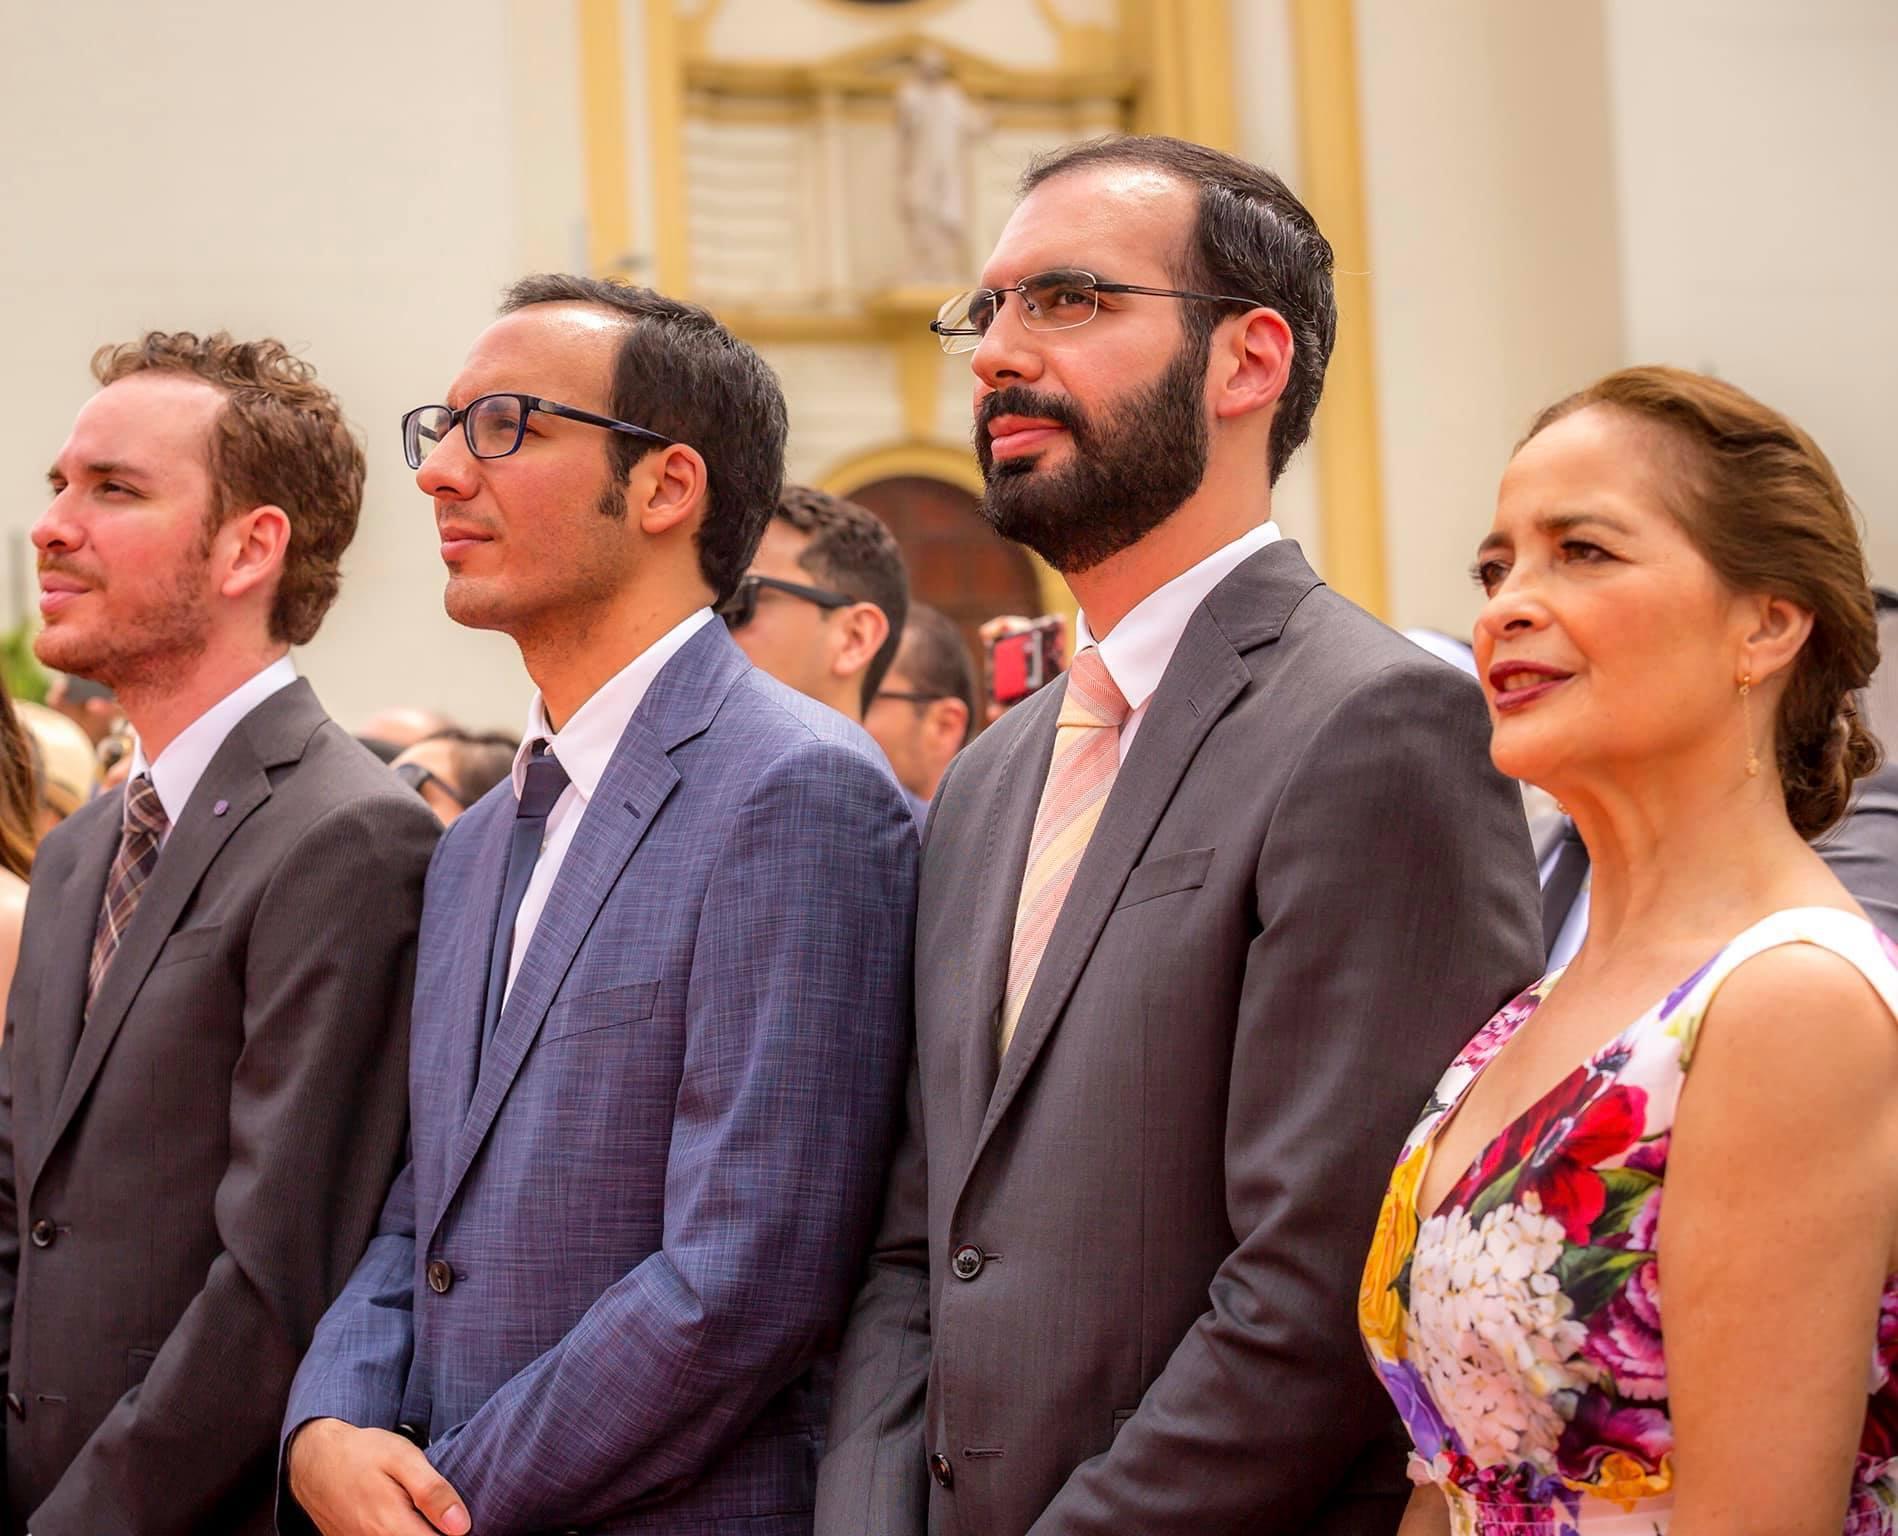 Nayib Bukele’s mother, Olga Ortez, and his brothers Karim, Ibrajim and Yusef (from right to left) at the president’s inauguration on June 1, 2019. Photo available on Karim Bukele’s Facebook page.